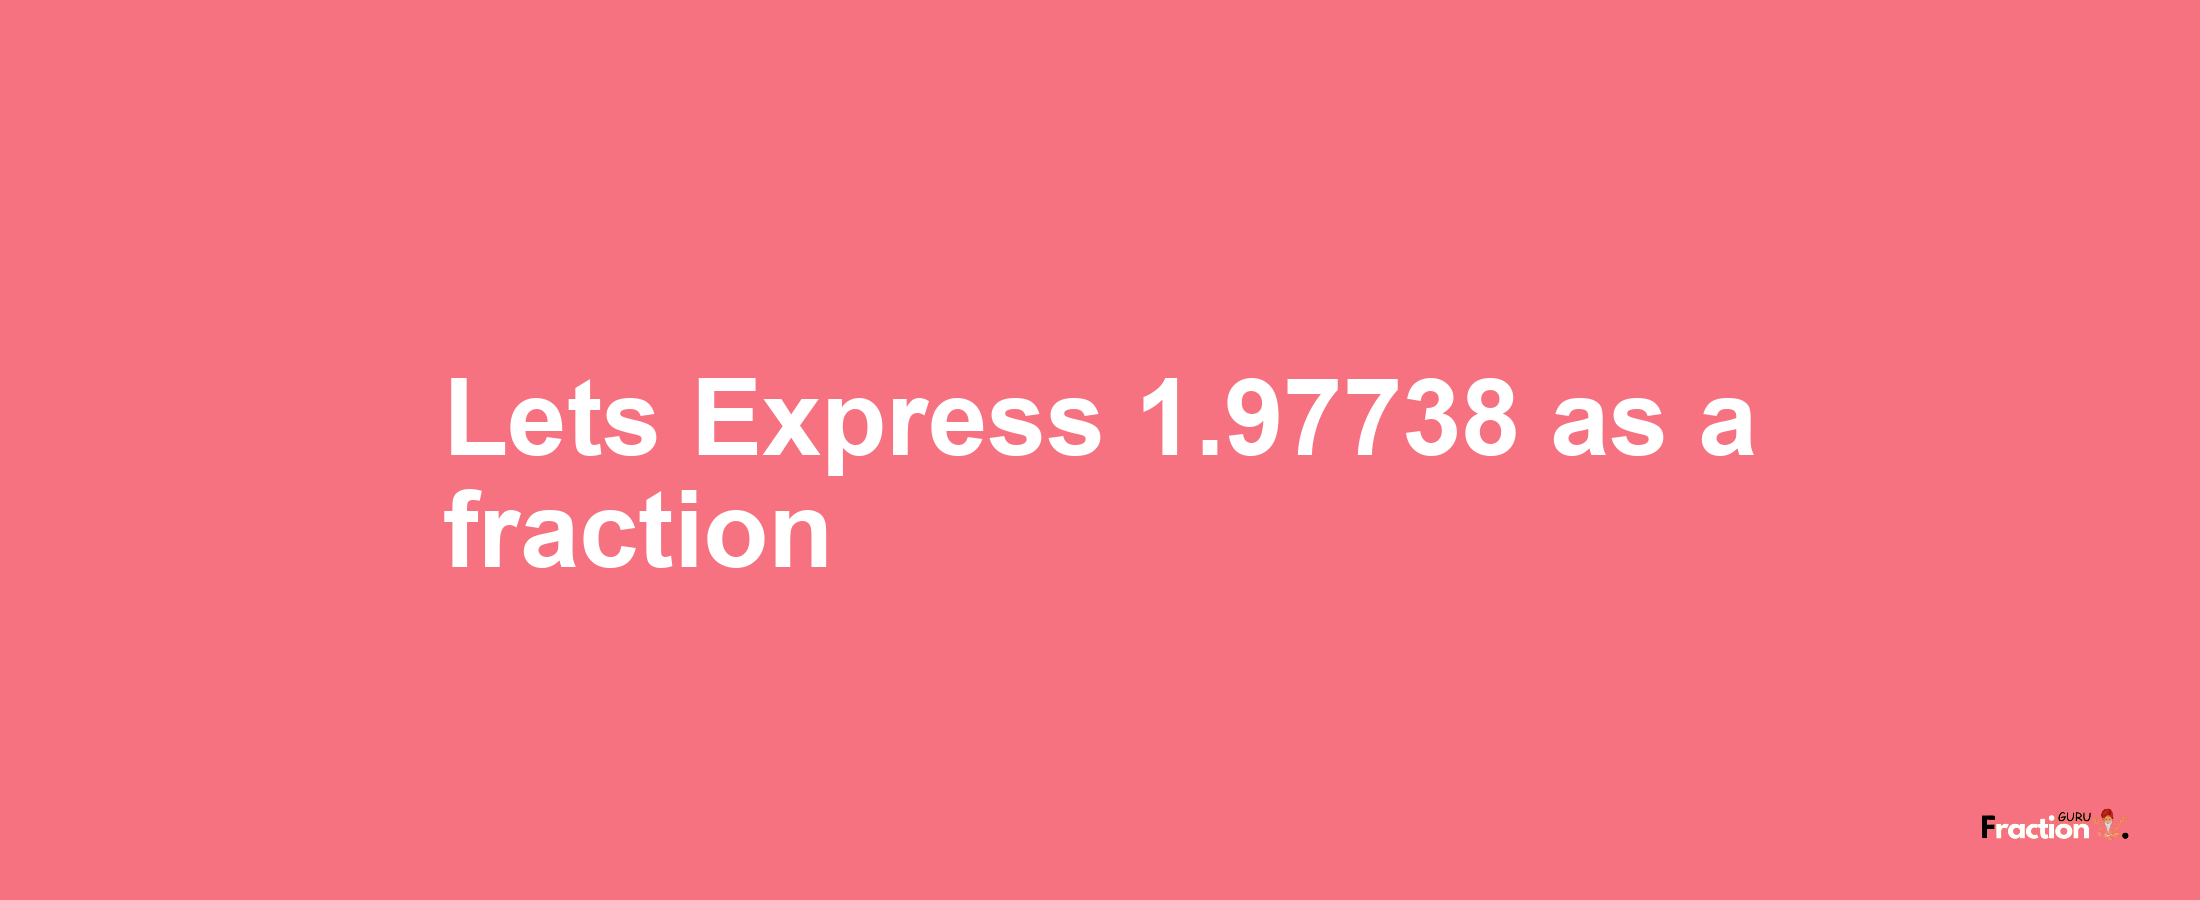 Lets Express 1.97738 as afraction